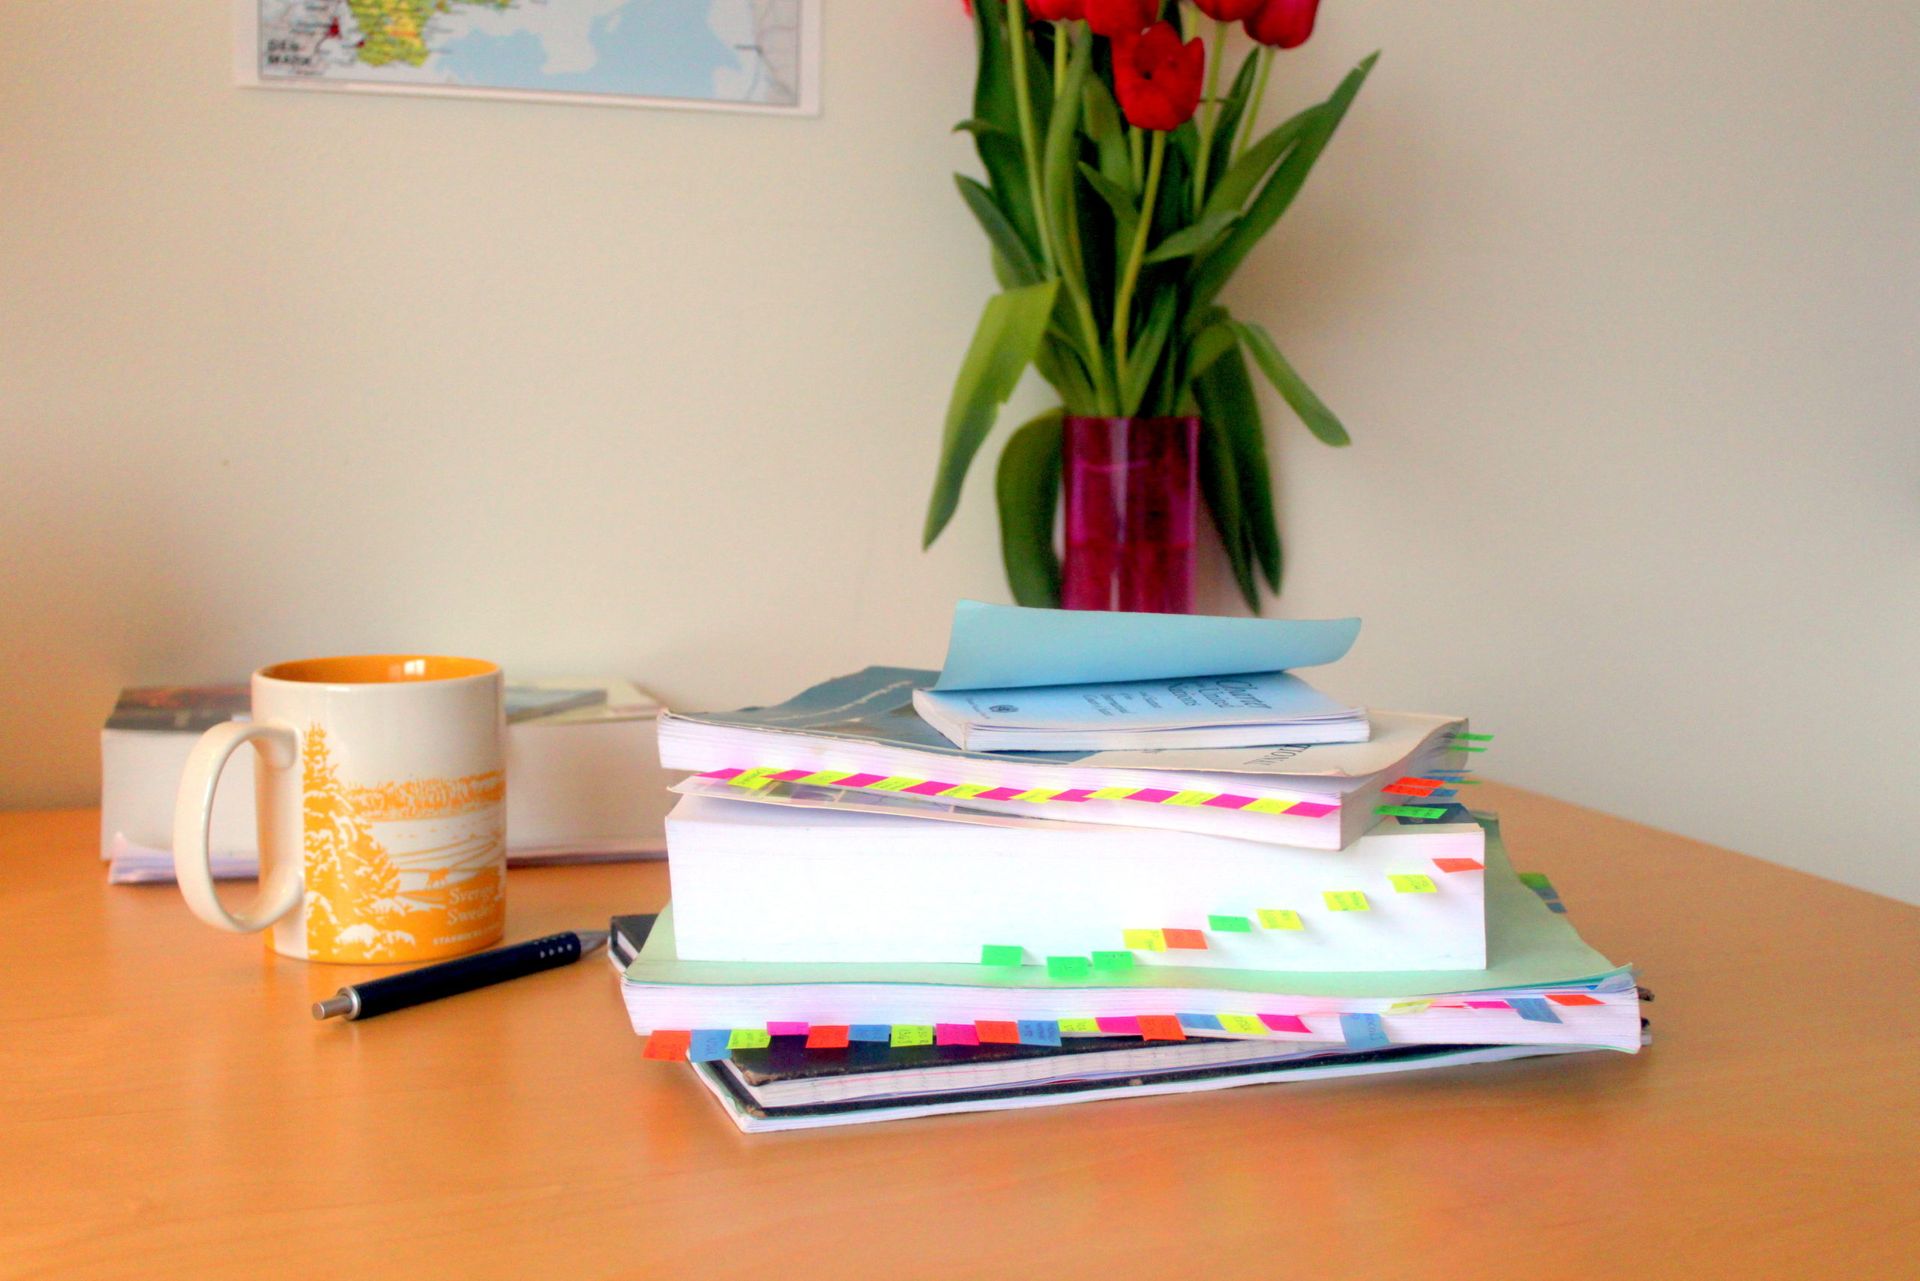 Coursebooks on a table. The books are full of multi-coloured stickynotes.